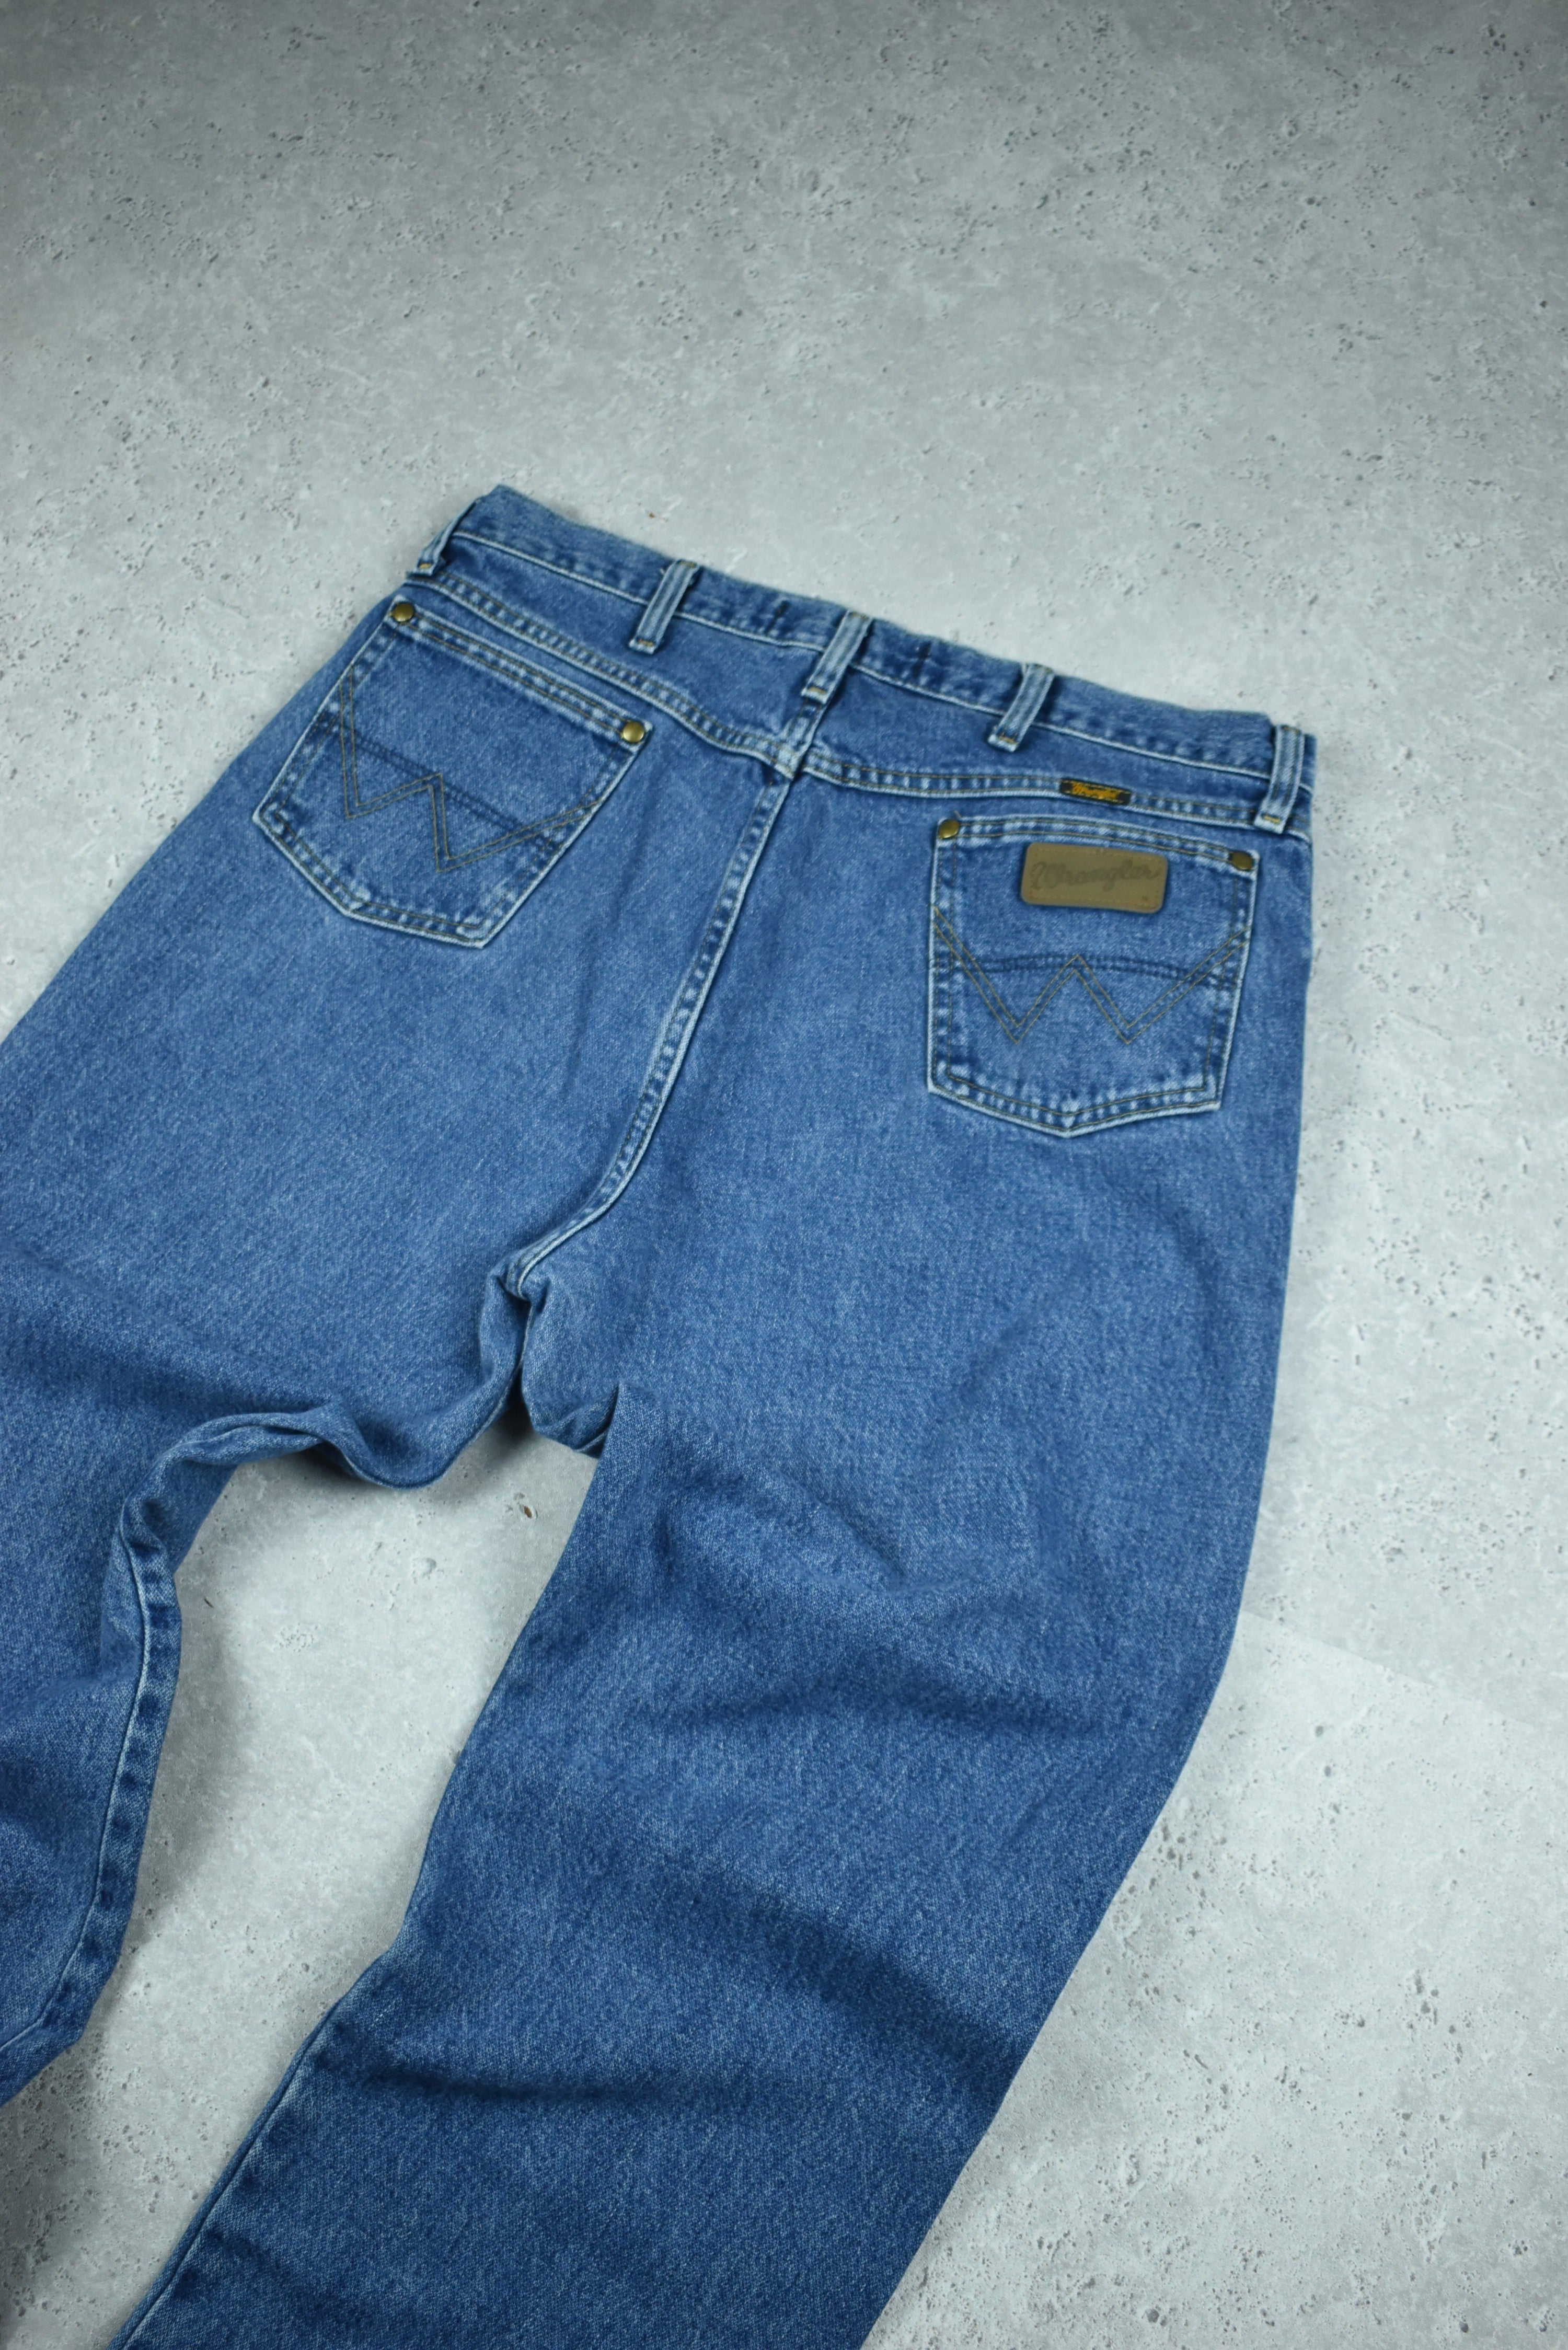 Vintage Wrangler Relaxed Fit Jeans 36x36